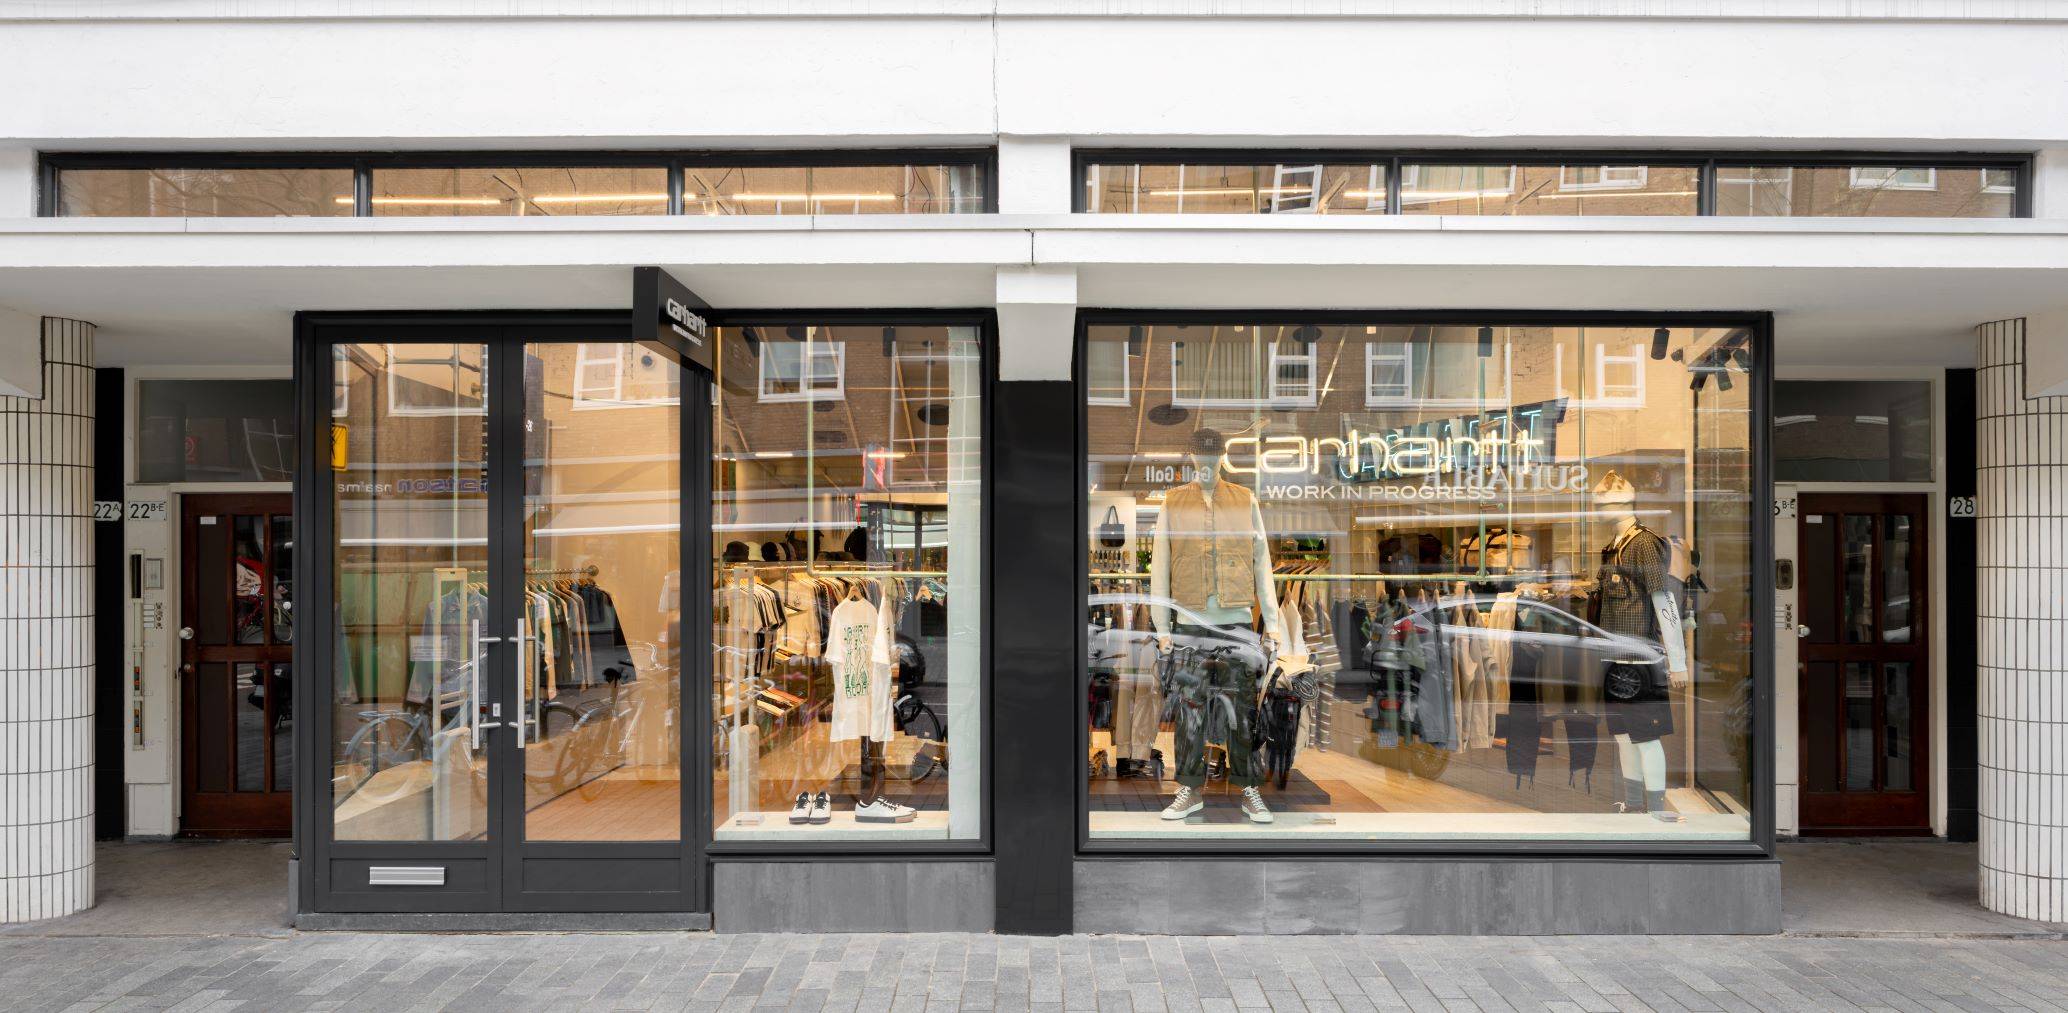 Carhartt WIP is now open at the Meent - Inside Rotterdam Magazine